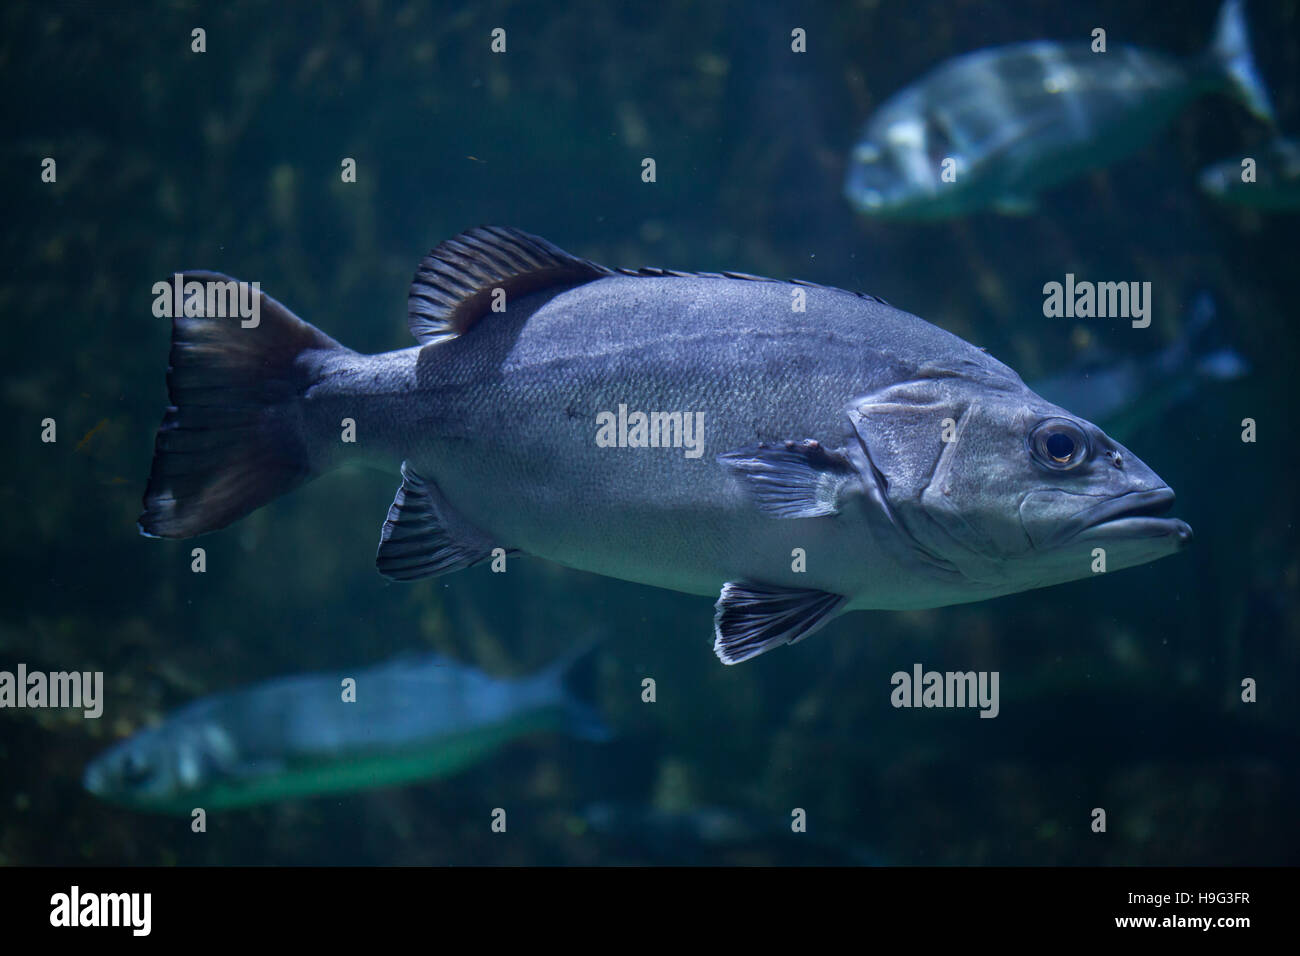 Atlantic wreckfish (Polyprion americanus), also known as the stone bass. Stock Photo